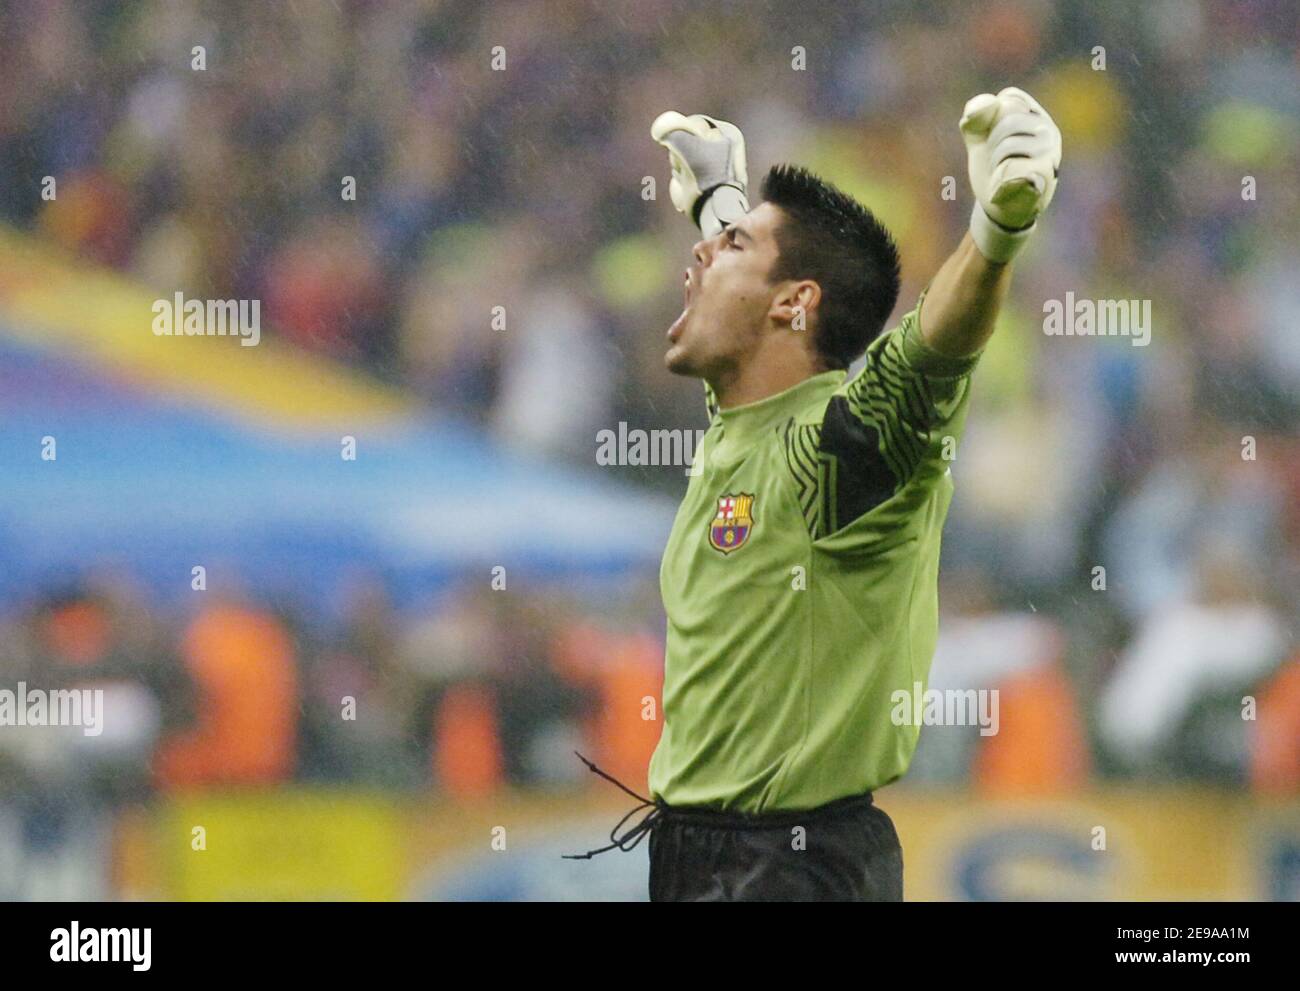 Barcelona's Victor Valdes celebrates the victory during the Champions League final, Barcelona vs Arsenal, at the Stade de France, in Saint Denis, near Paris, France, on May 17, 2006. Barcelona won 2-1. Photo by Nicolas Gouhier/CAMELEON/ABACAPRESS.COM Stock Photo